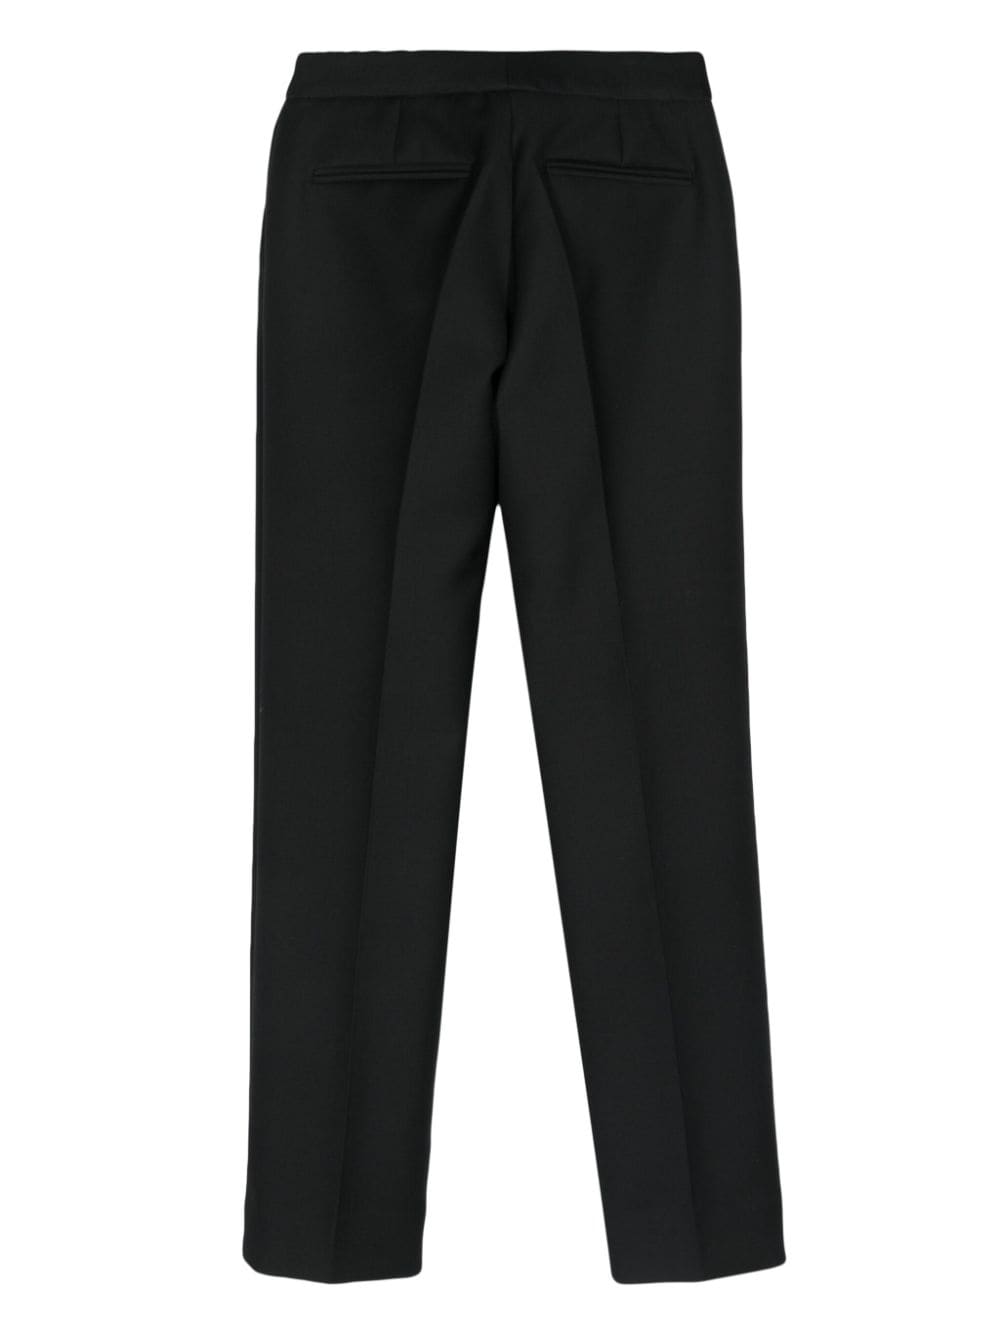 Image 2 of Christian Dior Pre-Owned pantalones rectos 2010